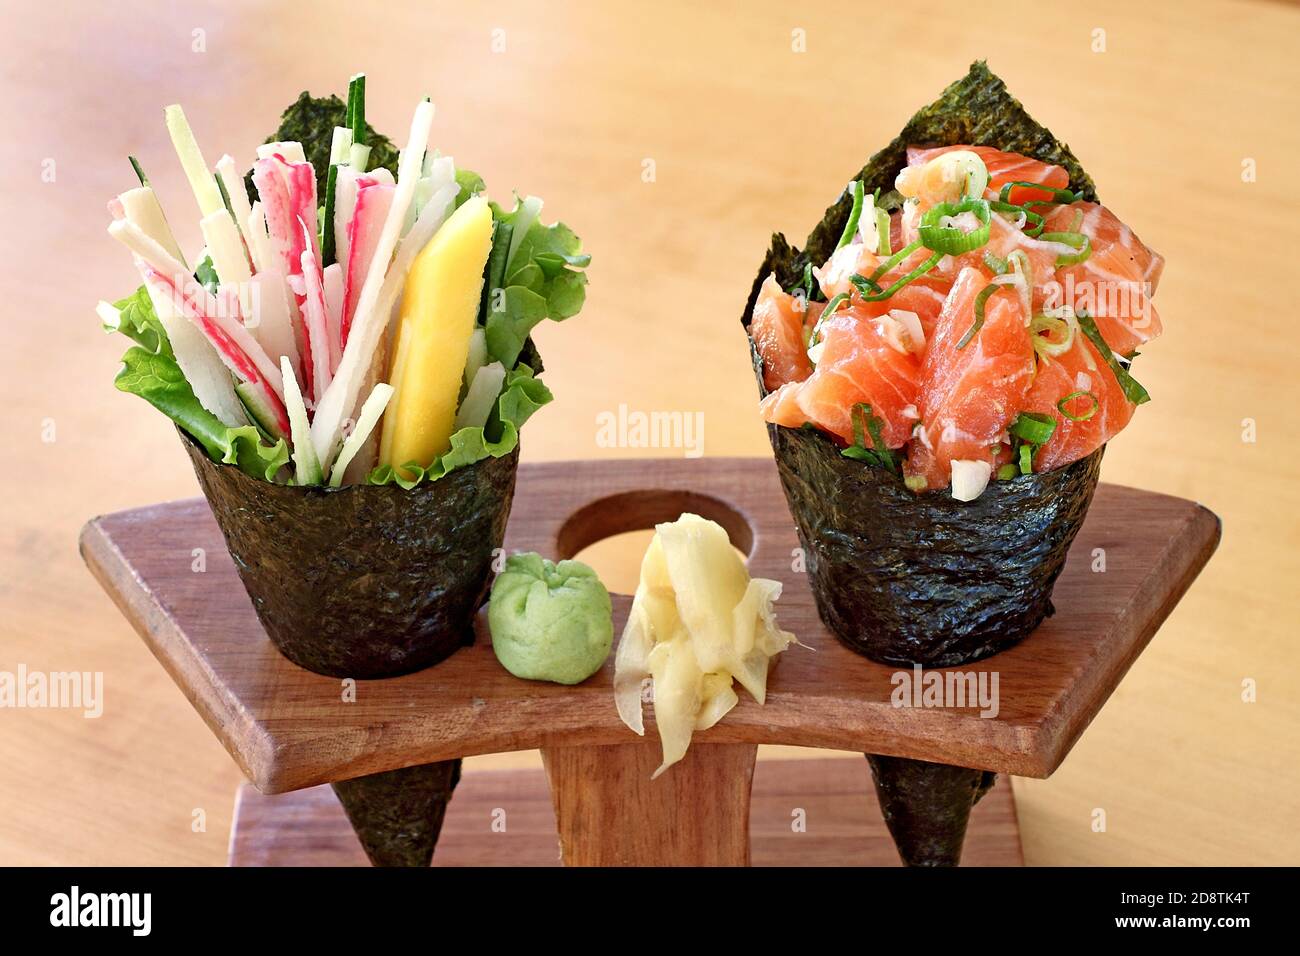 various dishes of Japanese cuisine Stock Photo